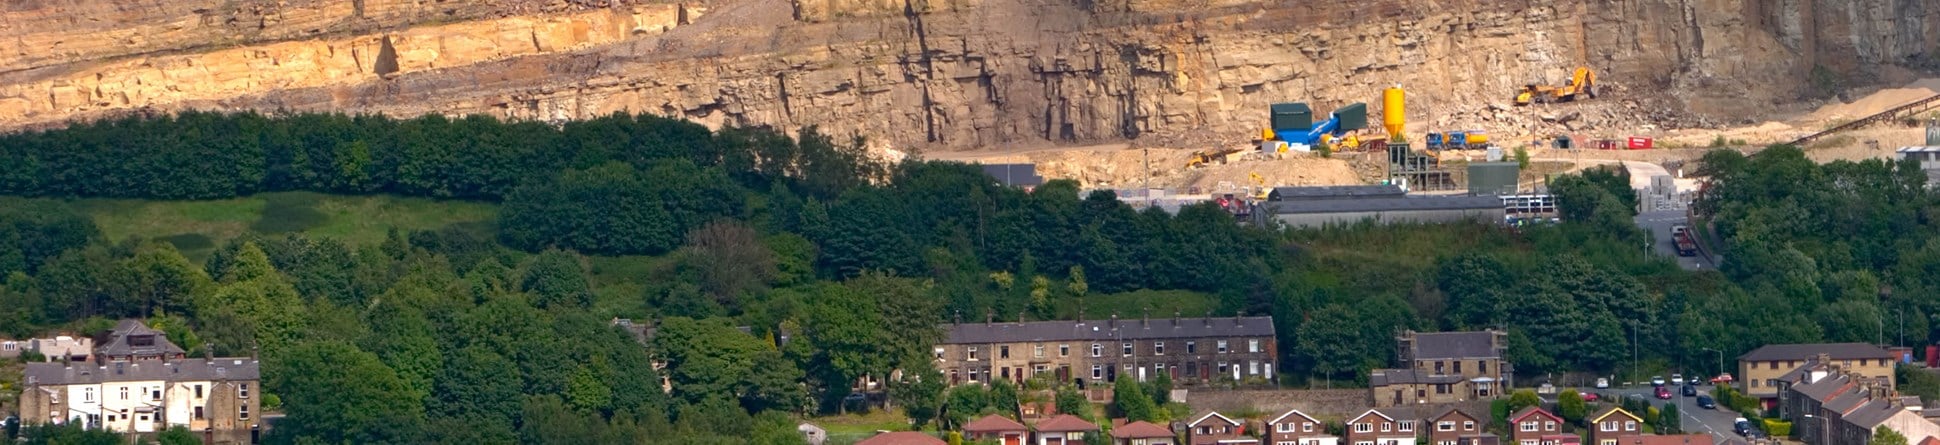 A wide view of a broad quarry face, quarry machinery, woodland and rows of houses.  